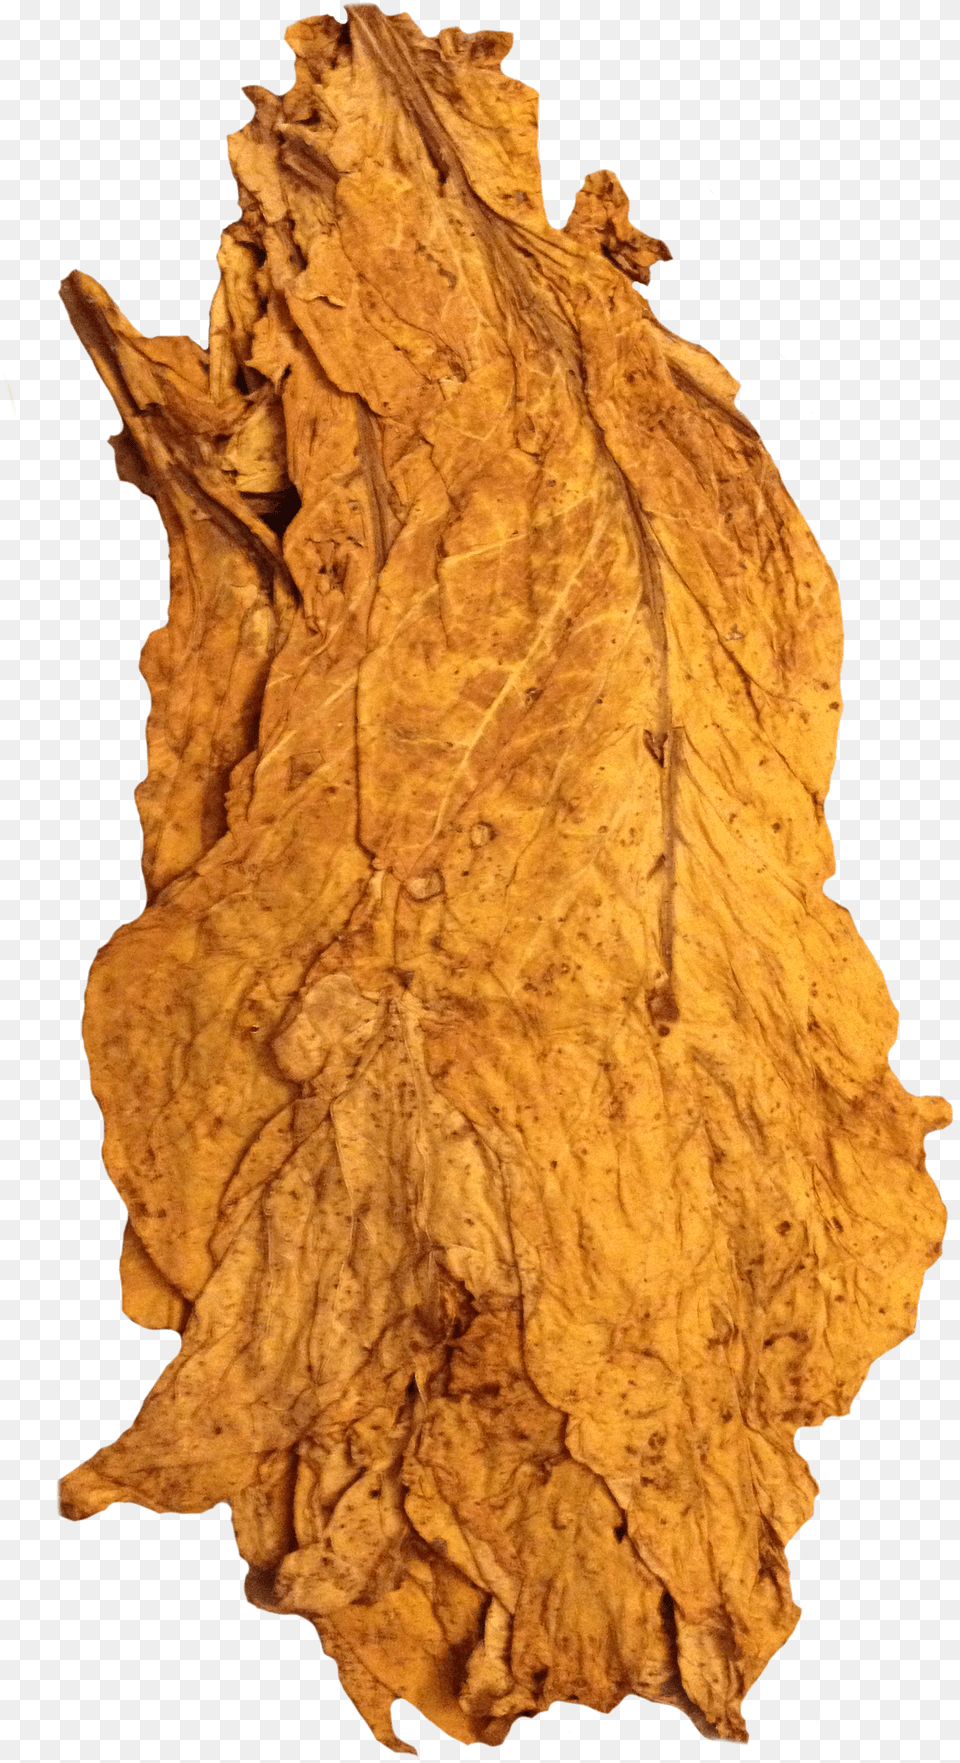 Half A Pound Of Quality Organic American Virginia Gold Tobacco Leaf Dry Free Transparent Png